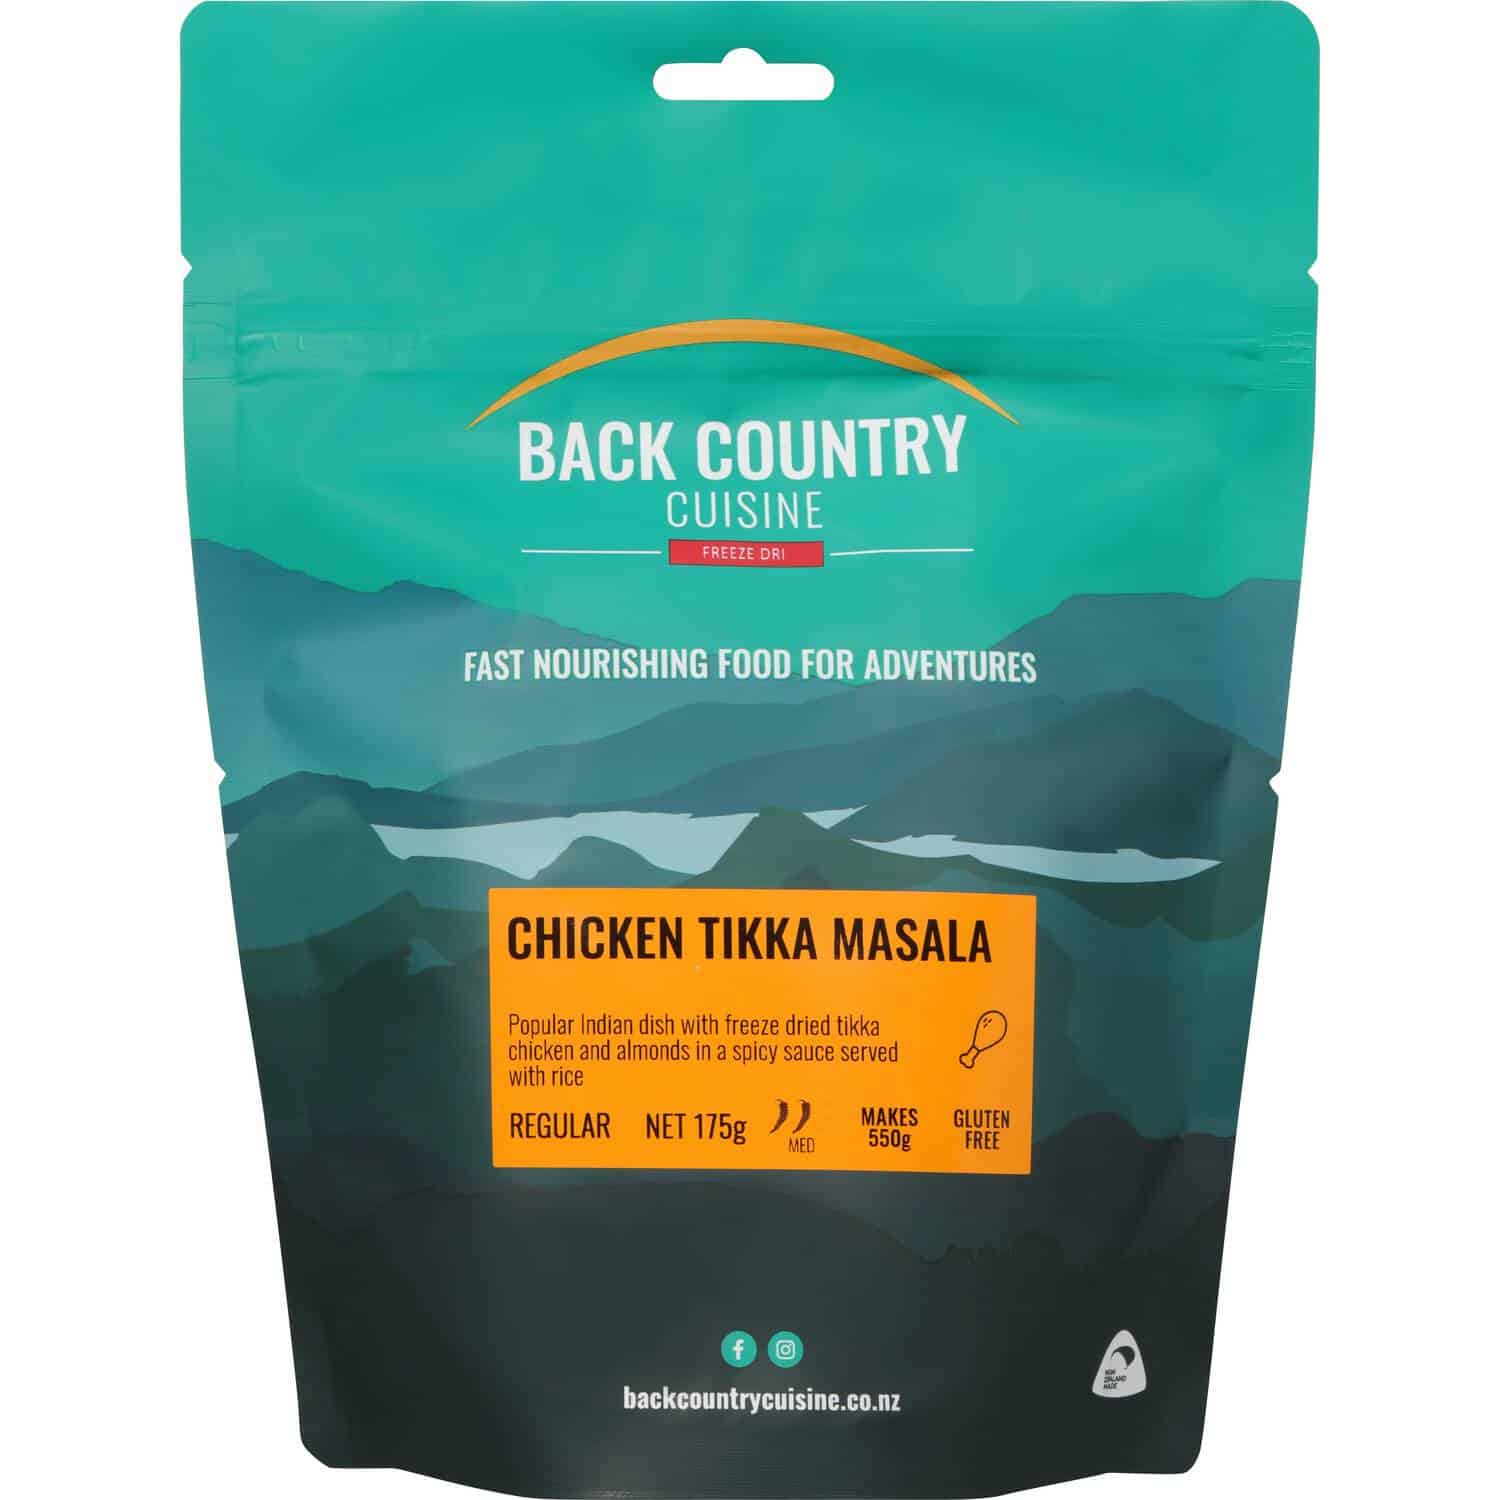 Back Country Cuisine Chicken Tikka Masala Regular - Tramping Food and Accessories sold by Venture Outdoors NZ